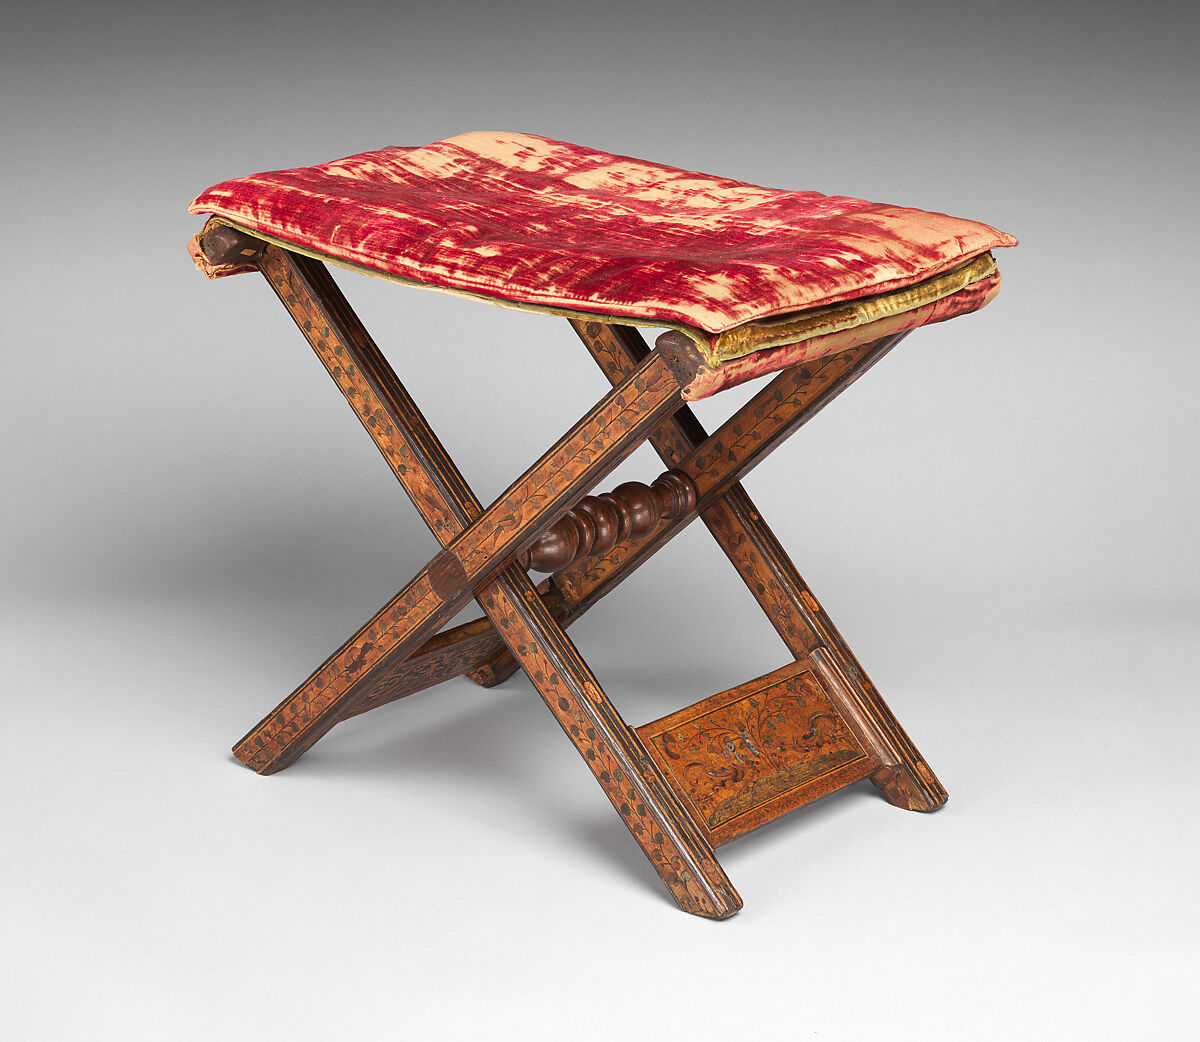 Folding stool, Oak decorated with marquetry including walnut, bog oak, maple, green-stained poplar, and other woods, Northern German or Polish 